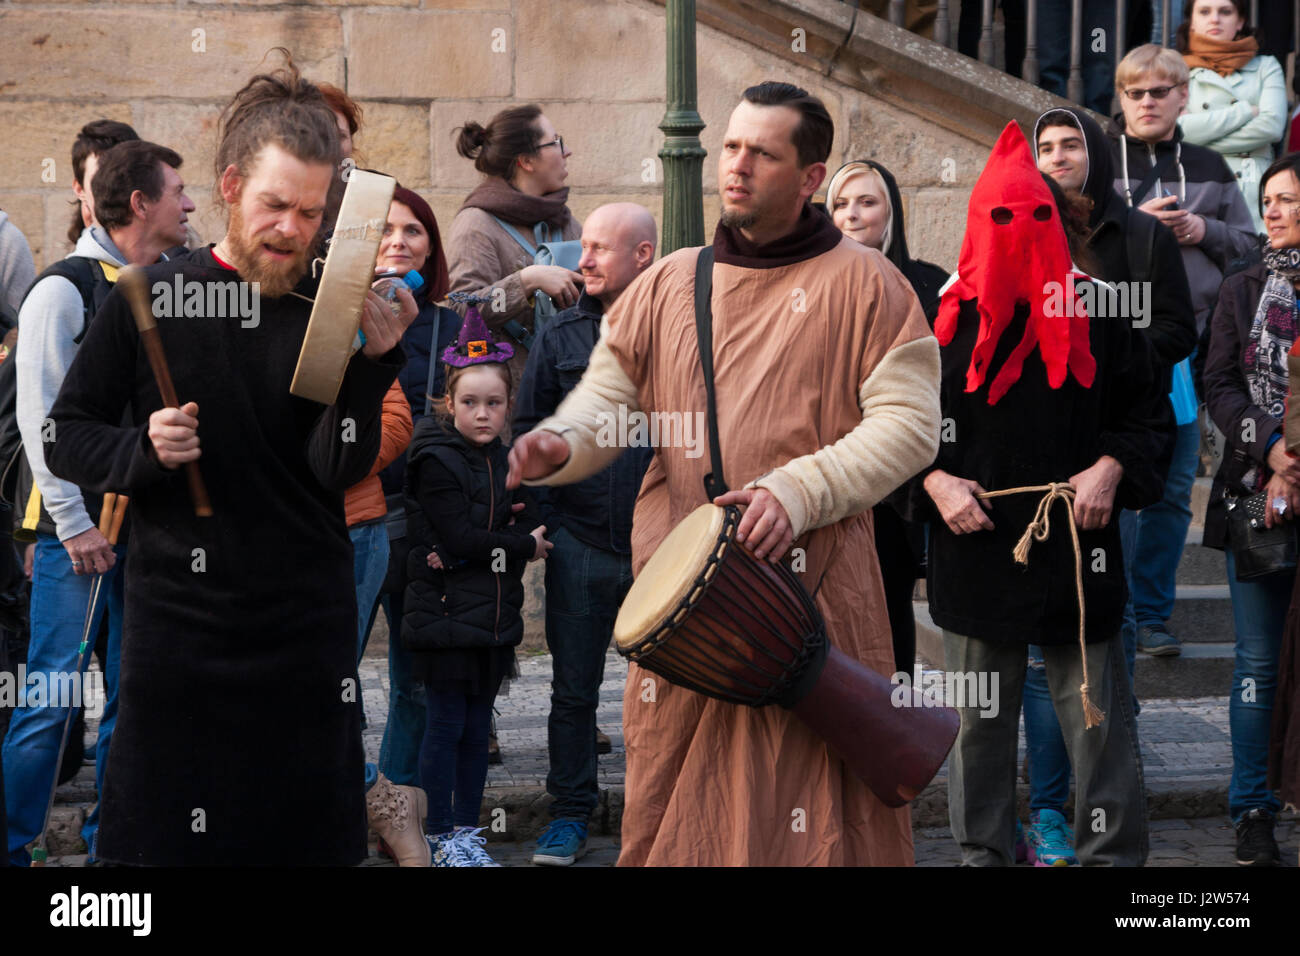 PRAGUE, CZECH REPUBLIC - APRIL 30, 2017: Participants of a costumed parade in the streets of Prague on witch burning night ('carodejnice') Stock Photo